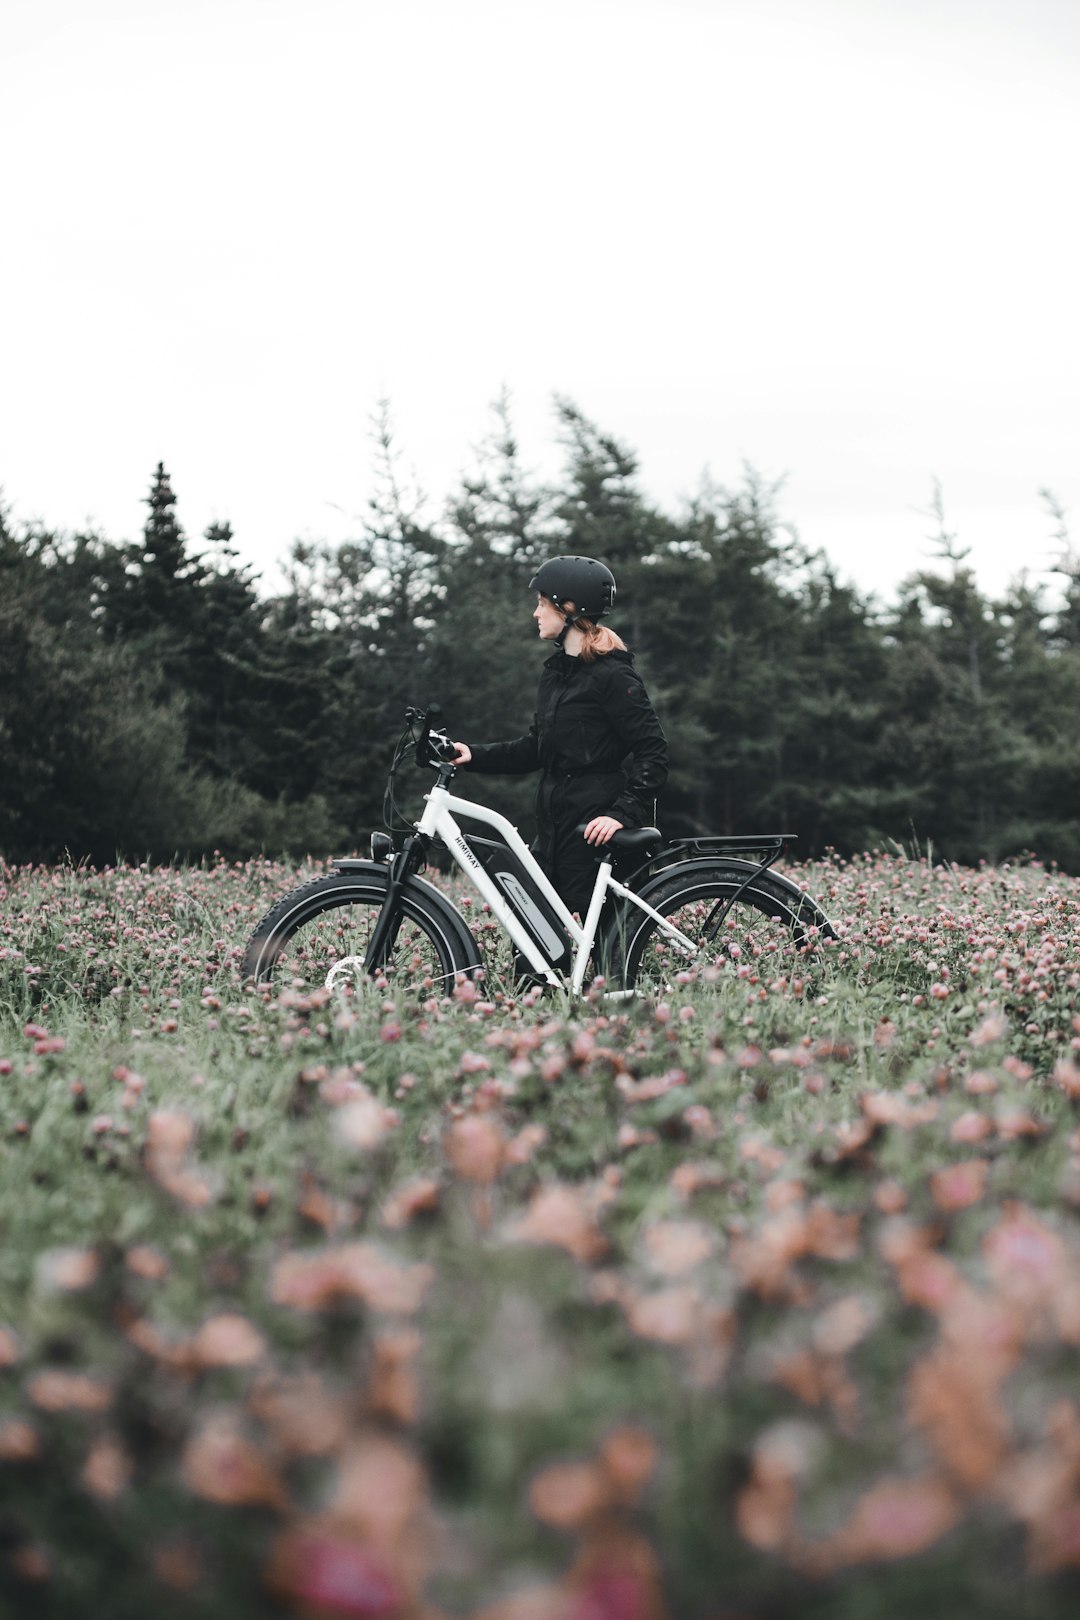 man in black jacket riding on bicycle on green grass field during daytime